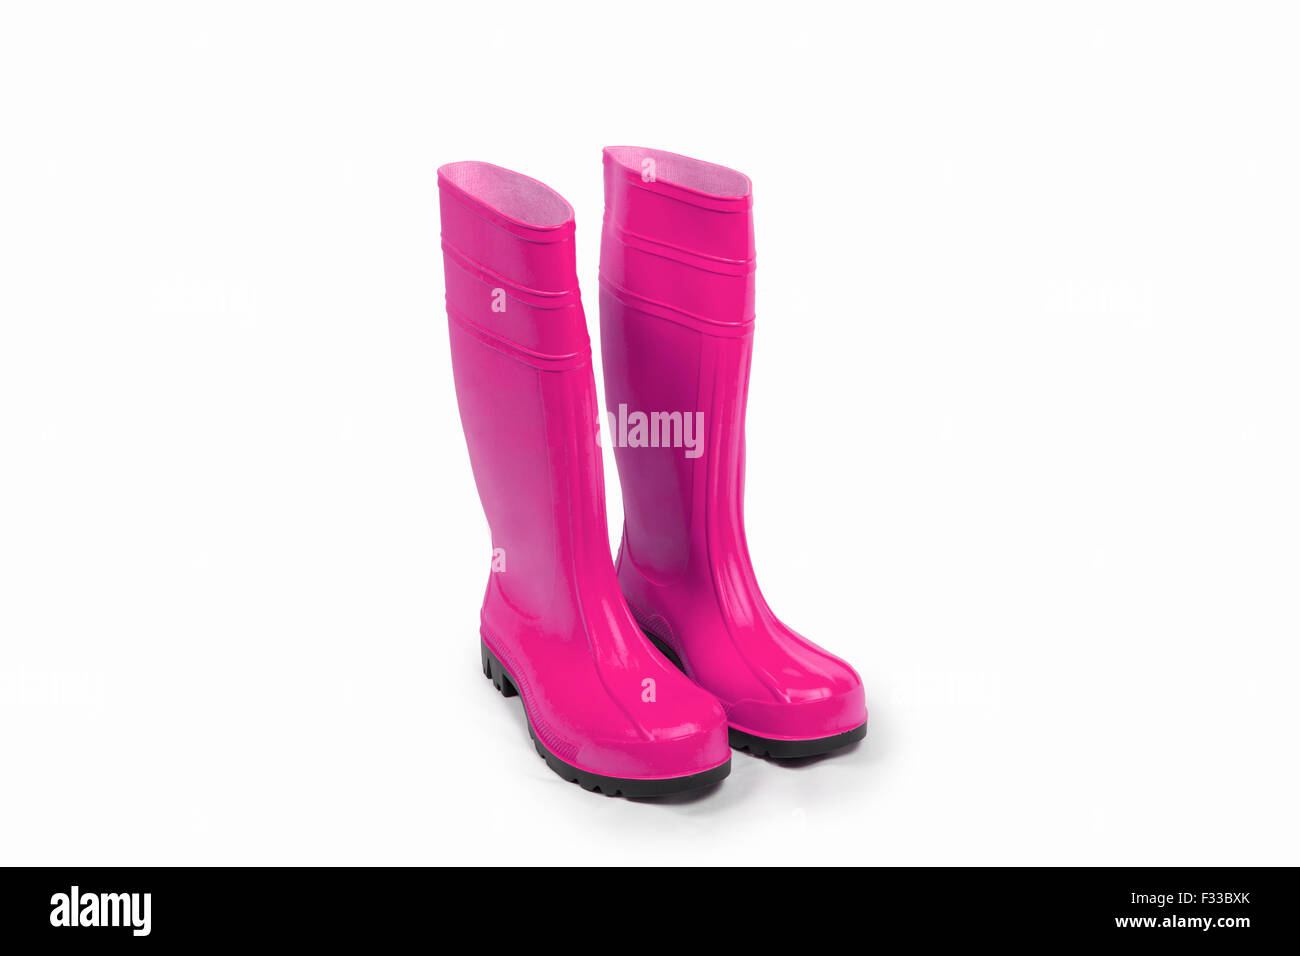 Pink rubber boots isolated Stock Photo - Alamy